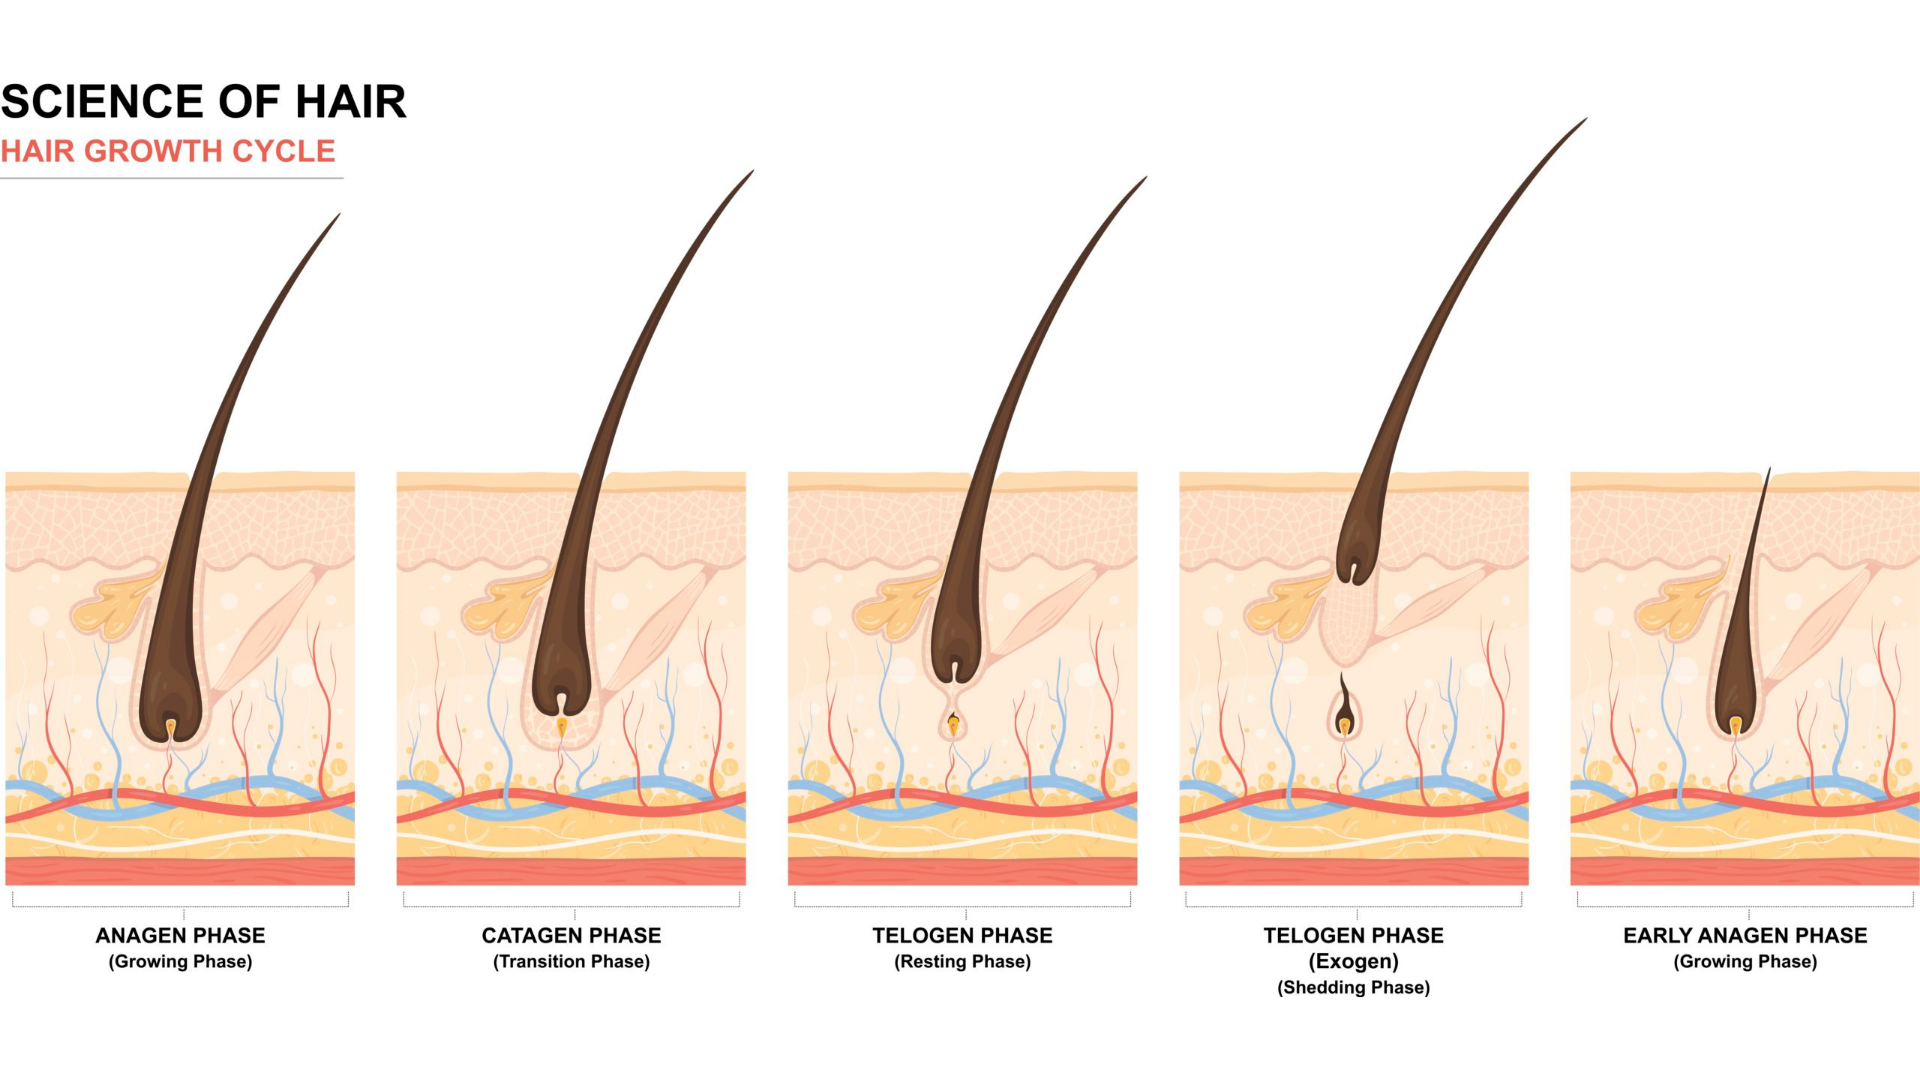 How to Regain Hair Loss From Stress | Wimpole Clinic